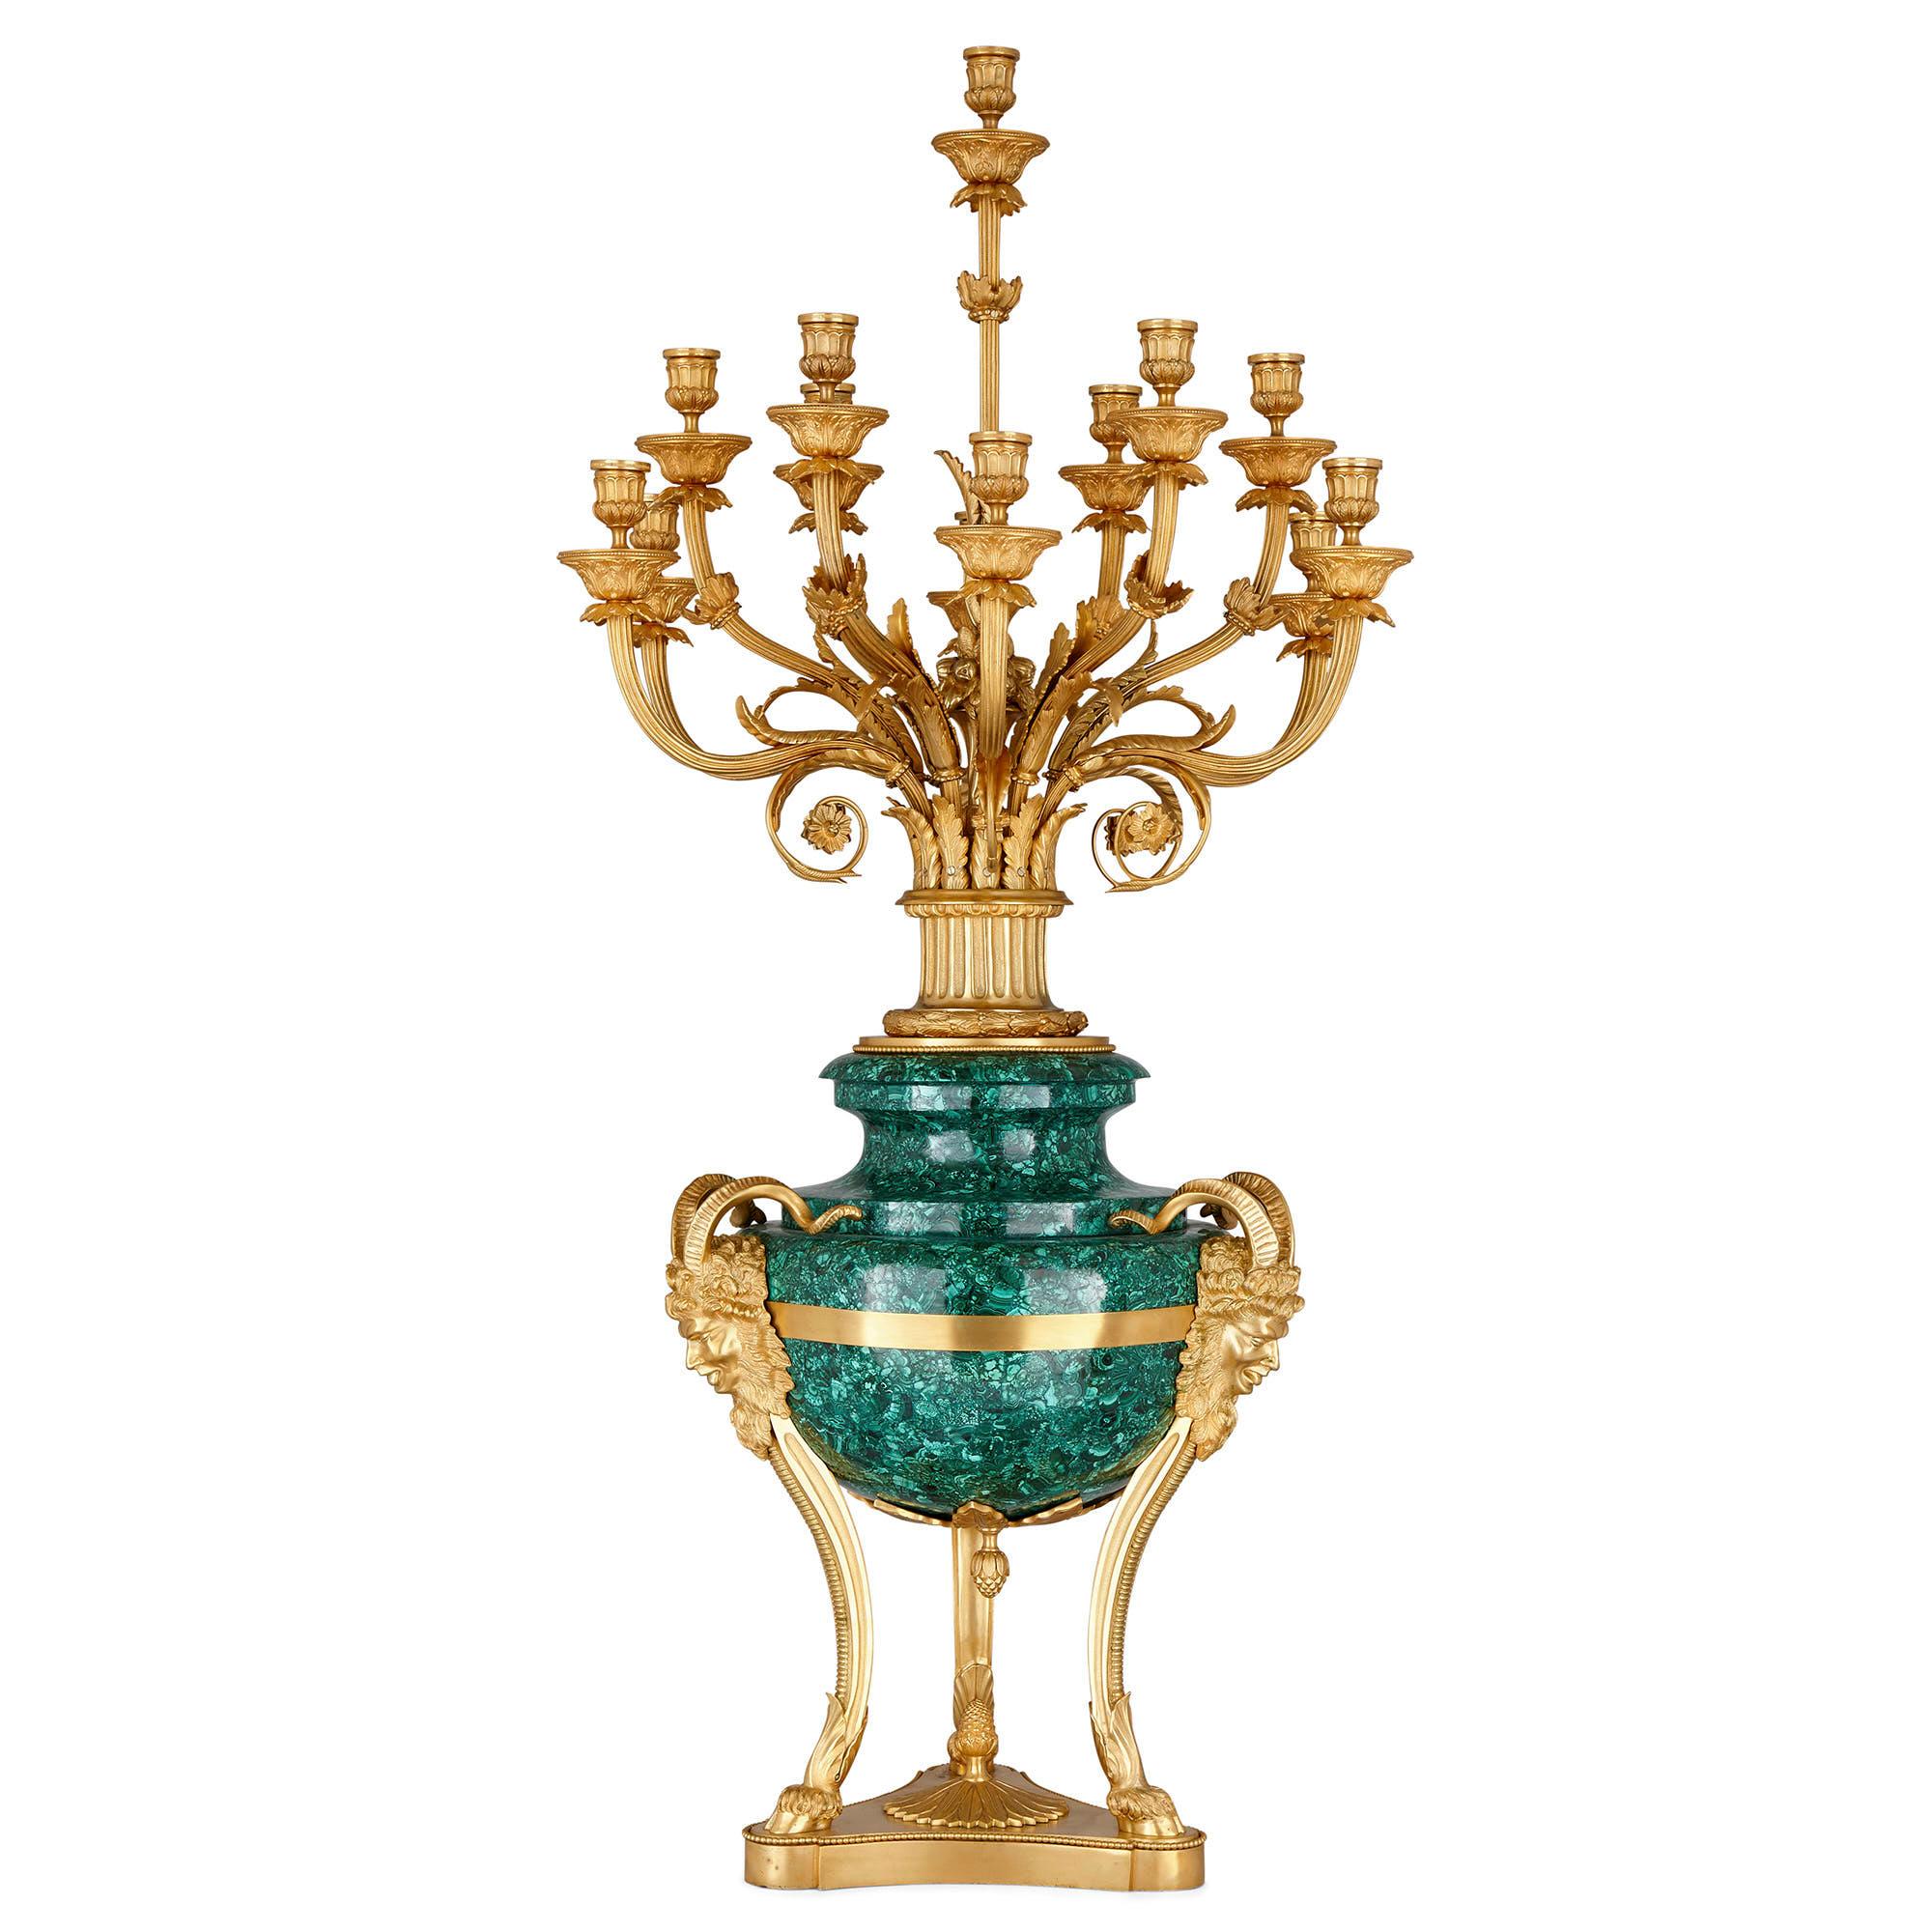 Pair of large gilt bronze and malachite neoclassical style candelabra
French, 20th century
Measures: Height 122cm, diameter 60cm

This large pair of neoclassical style candelabra is wrought from malachite and gilt bronze. Each candelabrum